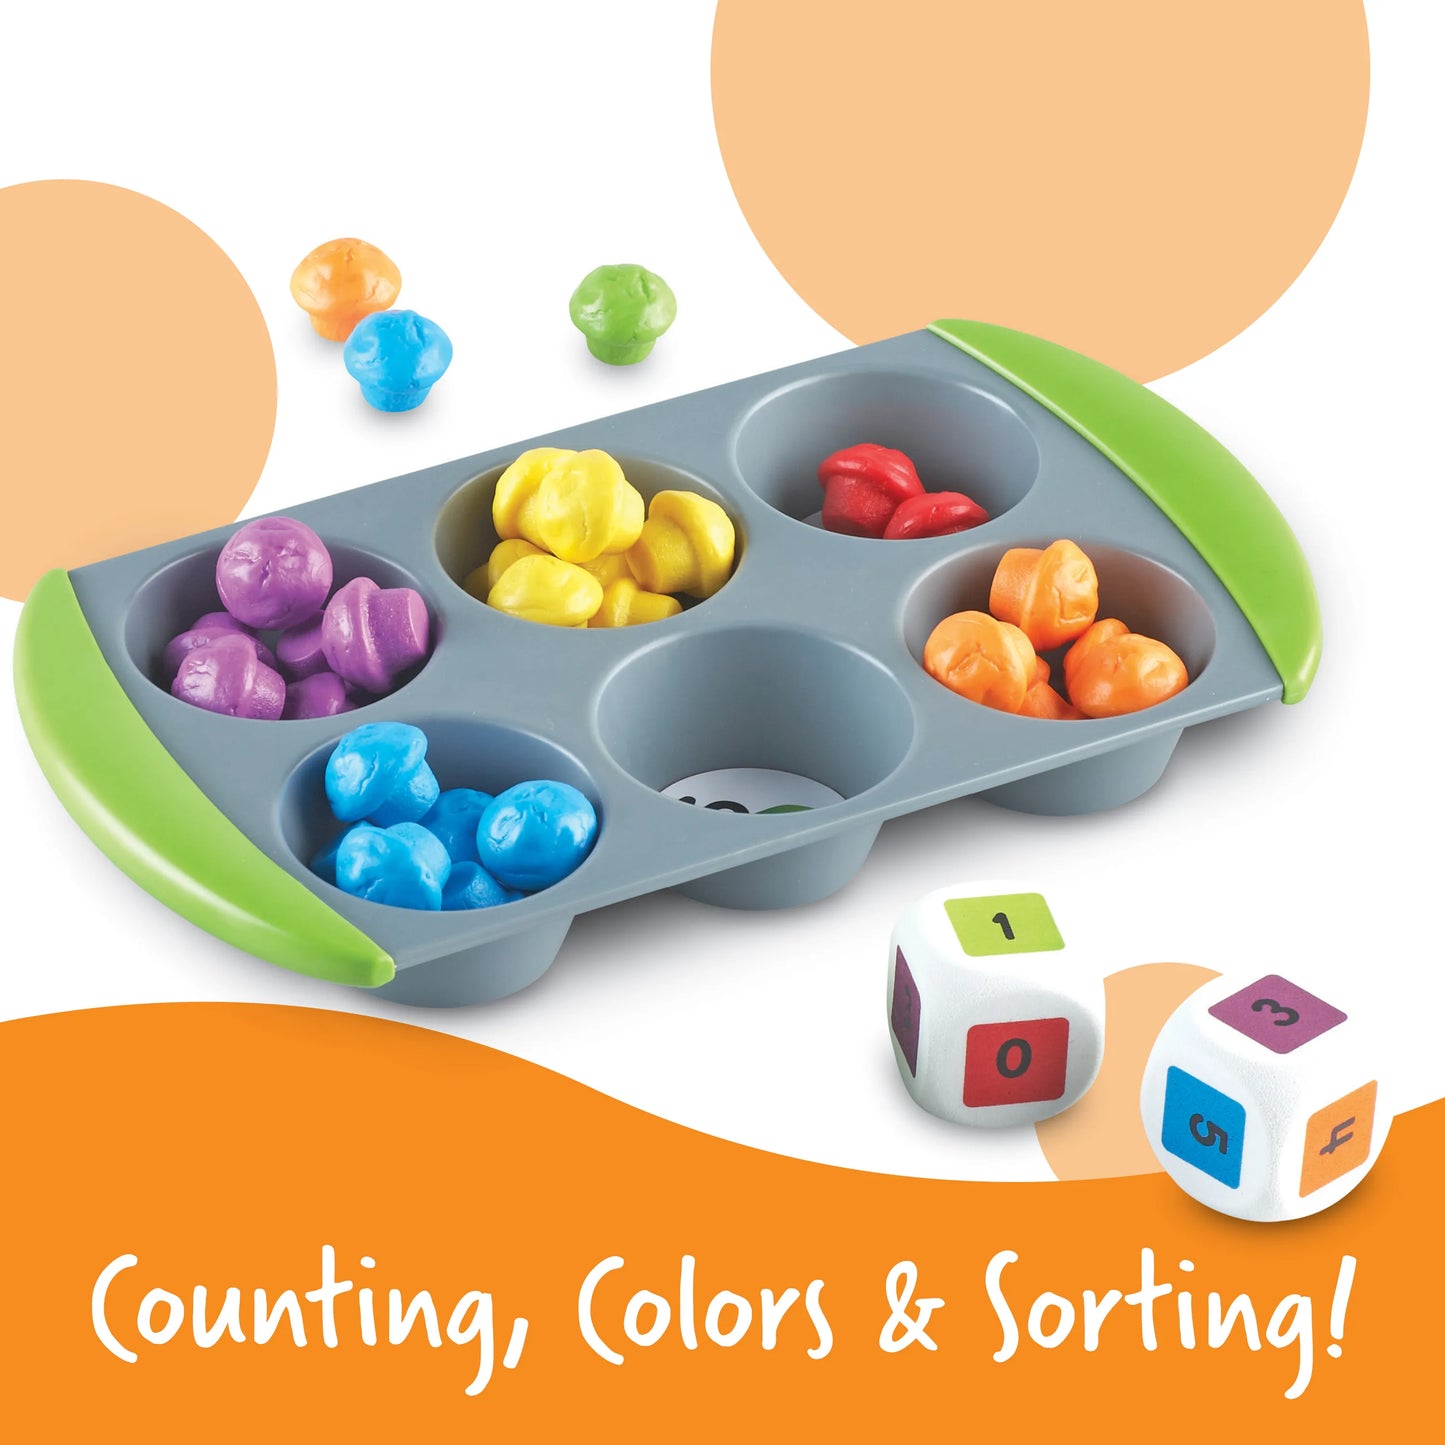 Learning Resources Mini Muffin Match Up Math Activity Set